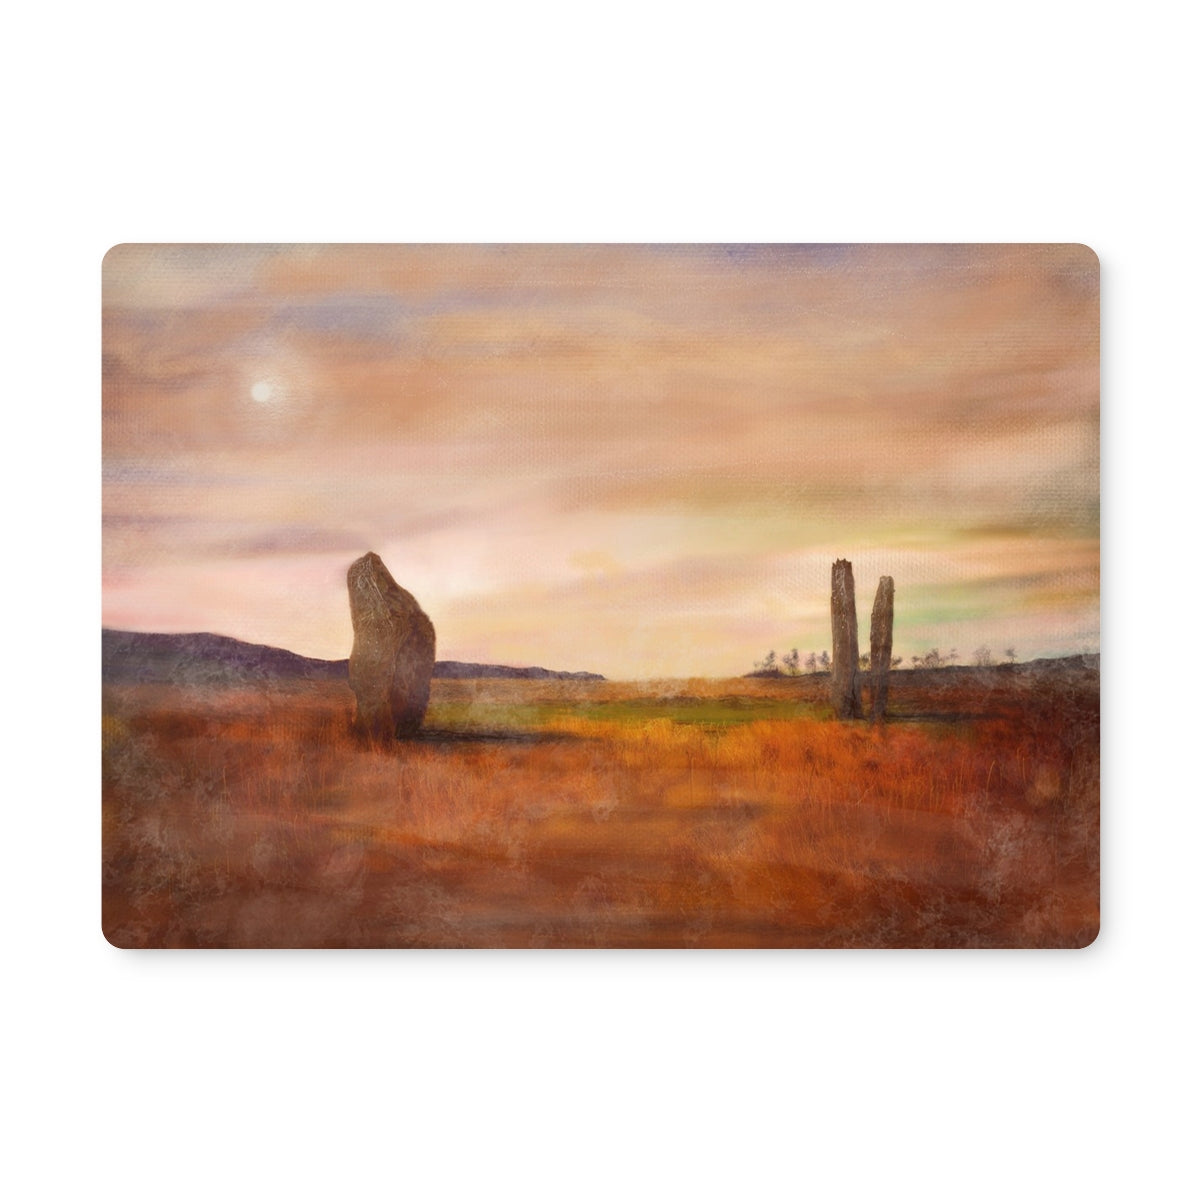 Machrie Moor Arran Art Gifts Placemat-Placemats-Arran Art Gallery-2 Placemats-Paintings, Prints, Homeware, Art Gifts From Scotland By Scottish Artist Kevin Hunter